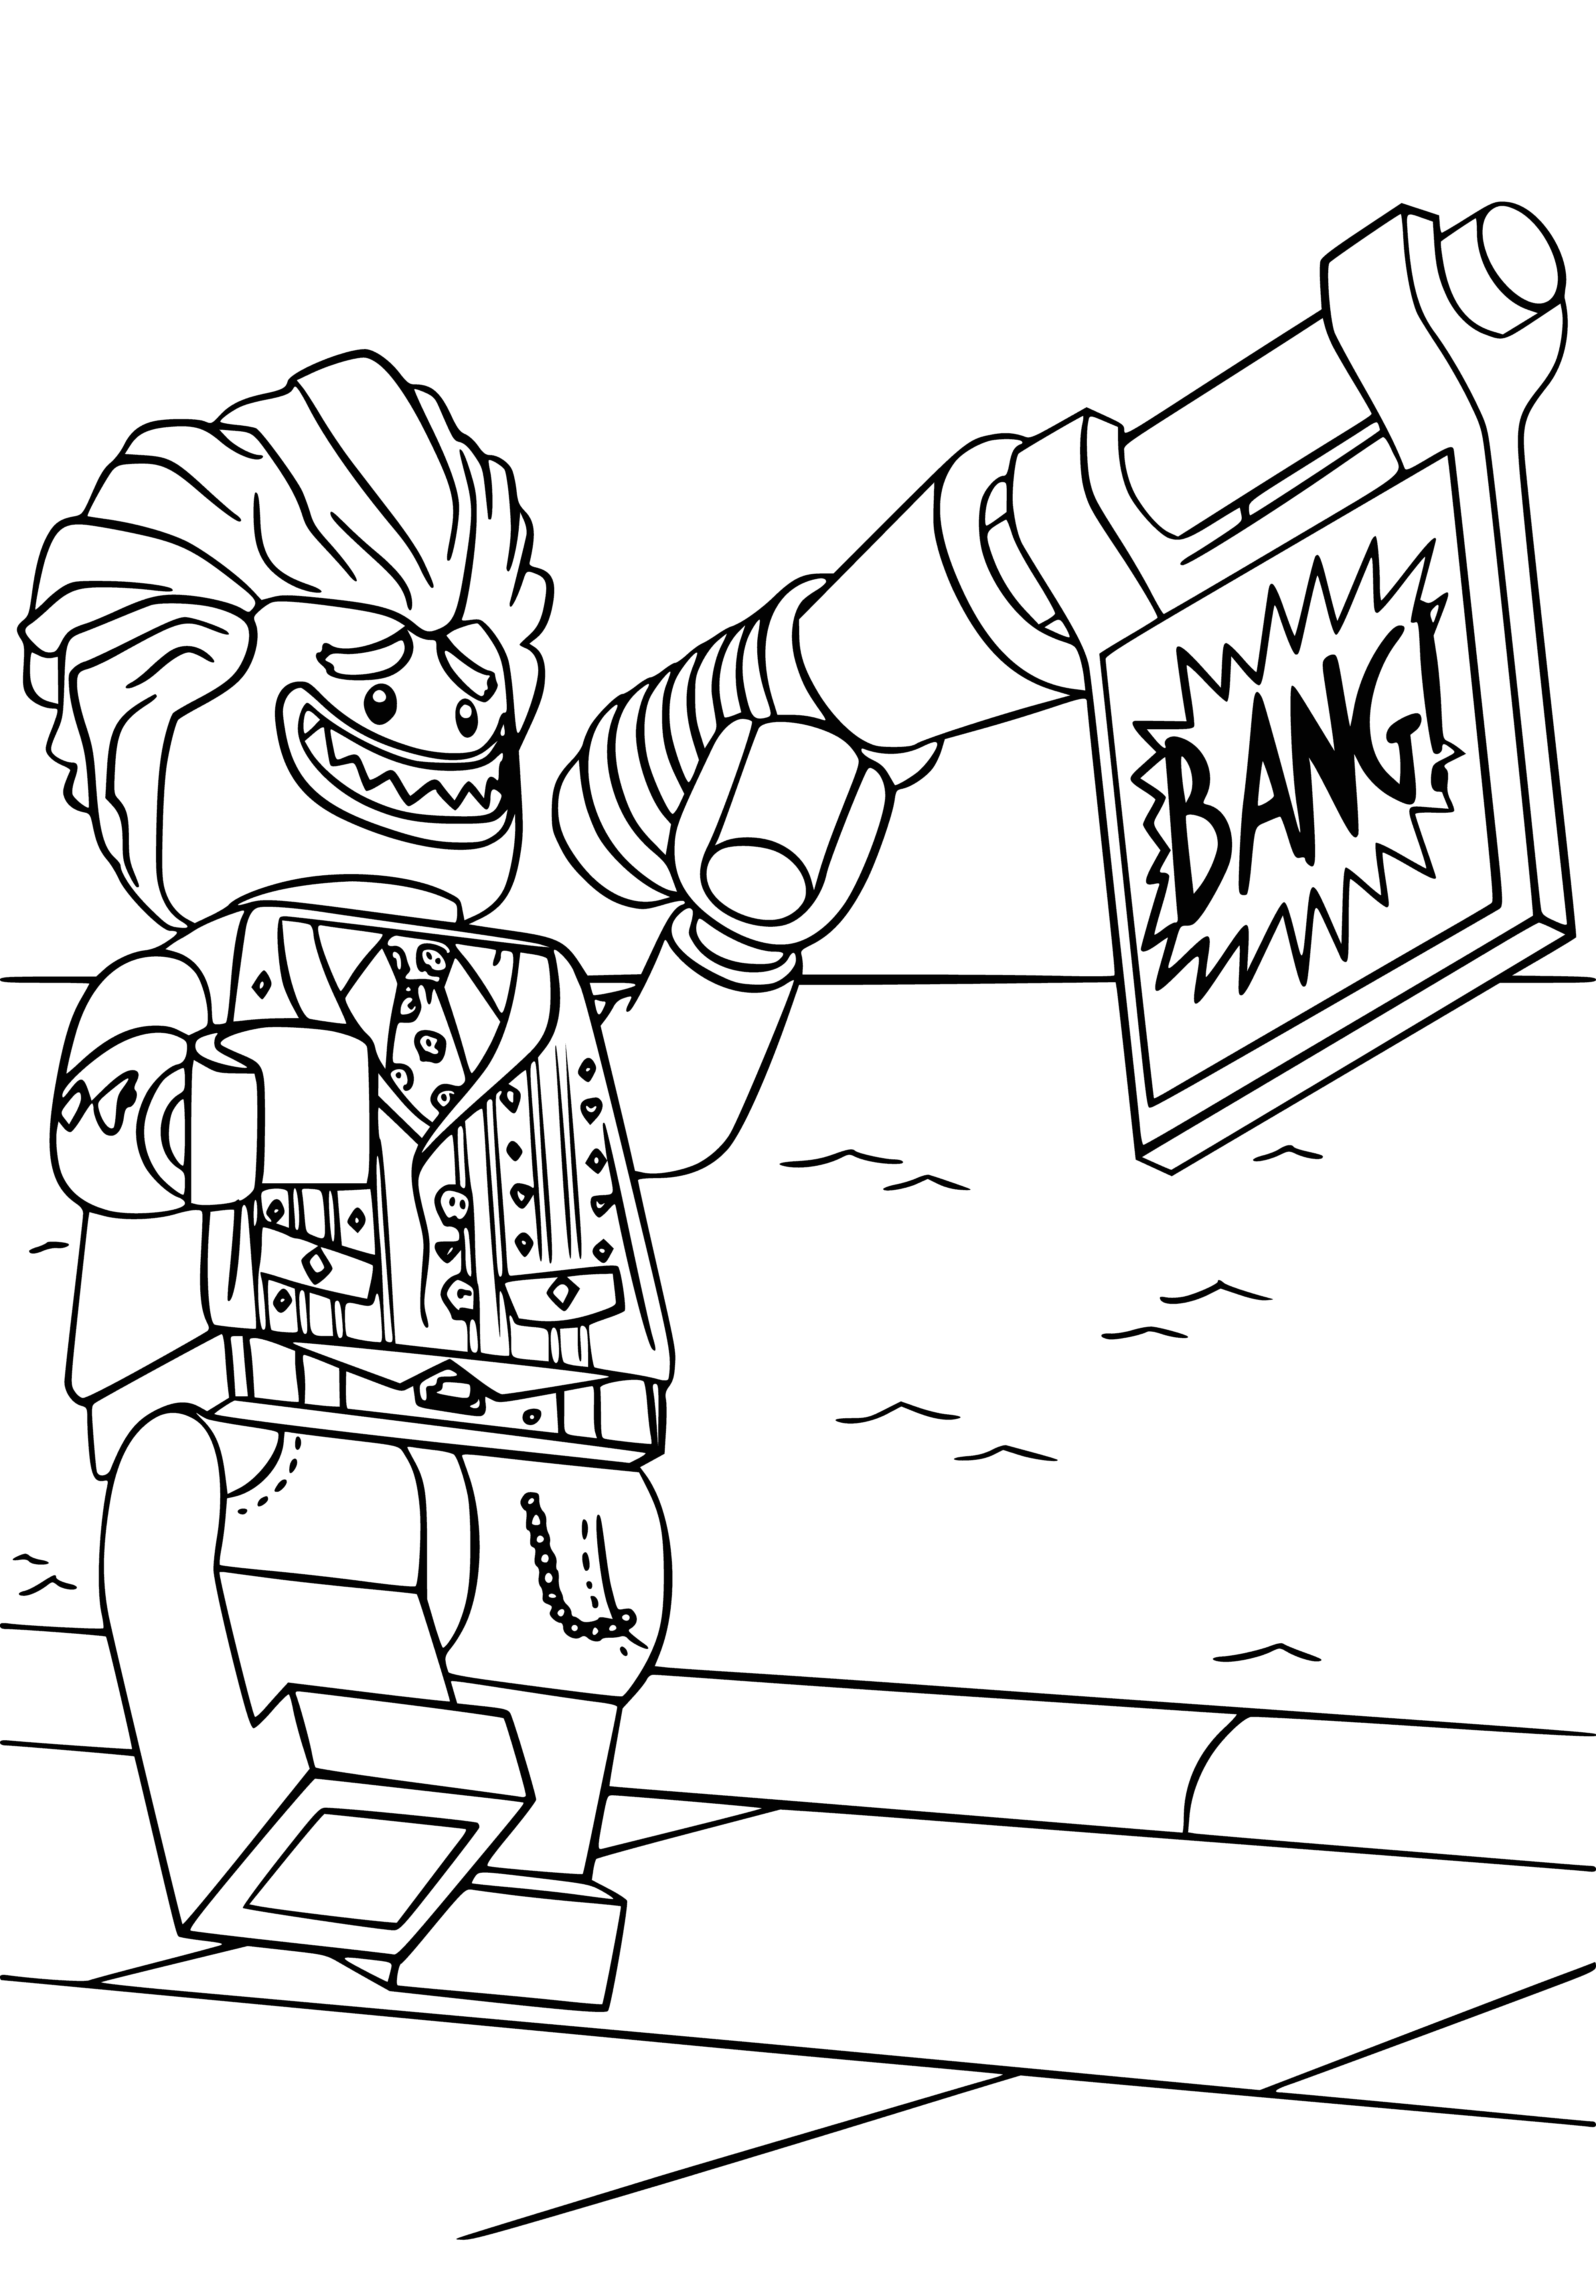 Joker with a cannon coloring page